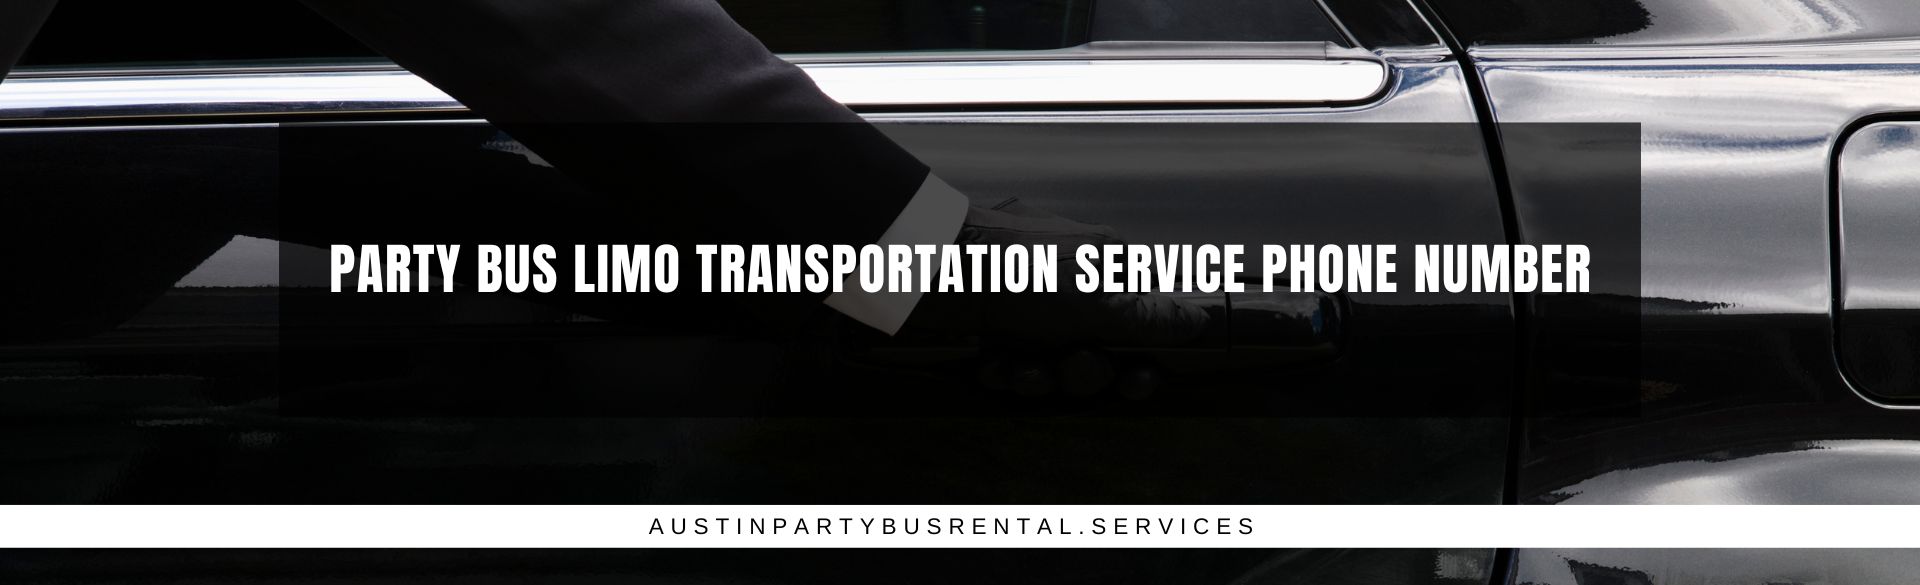 Austin Party Bus Limo Transportation Service Phone Number